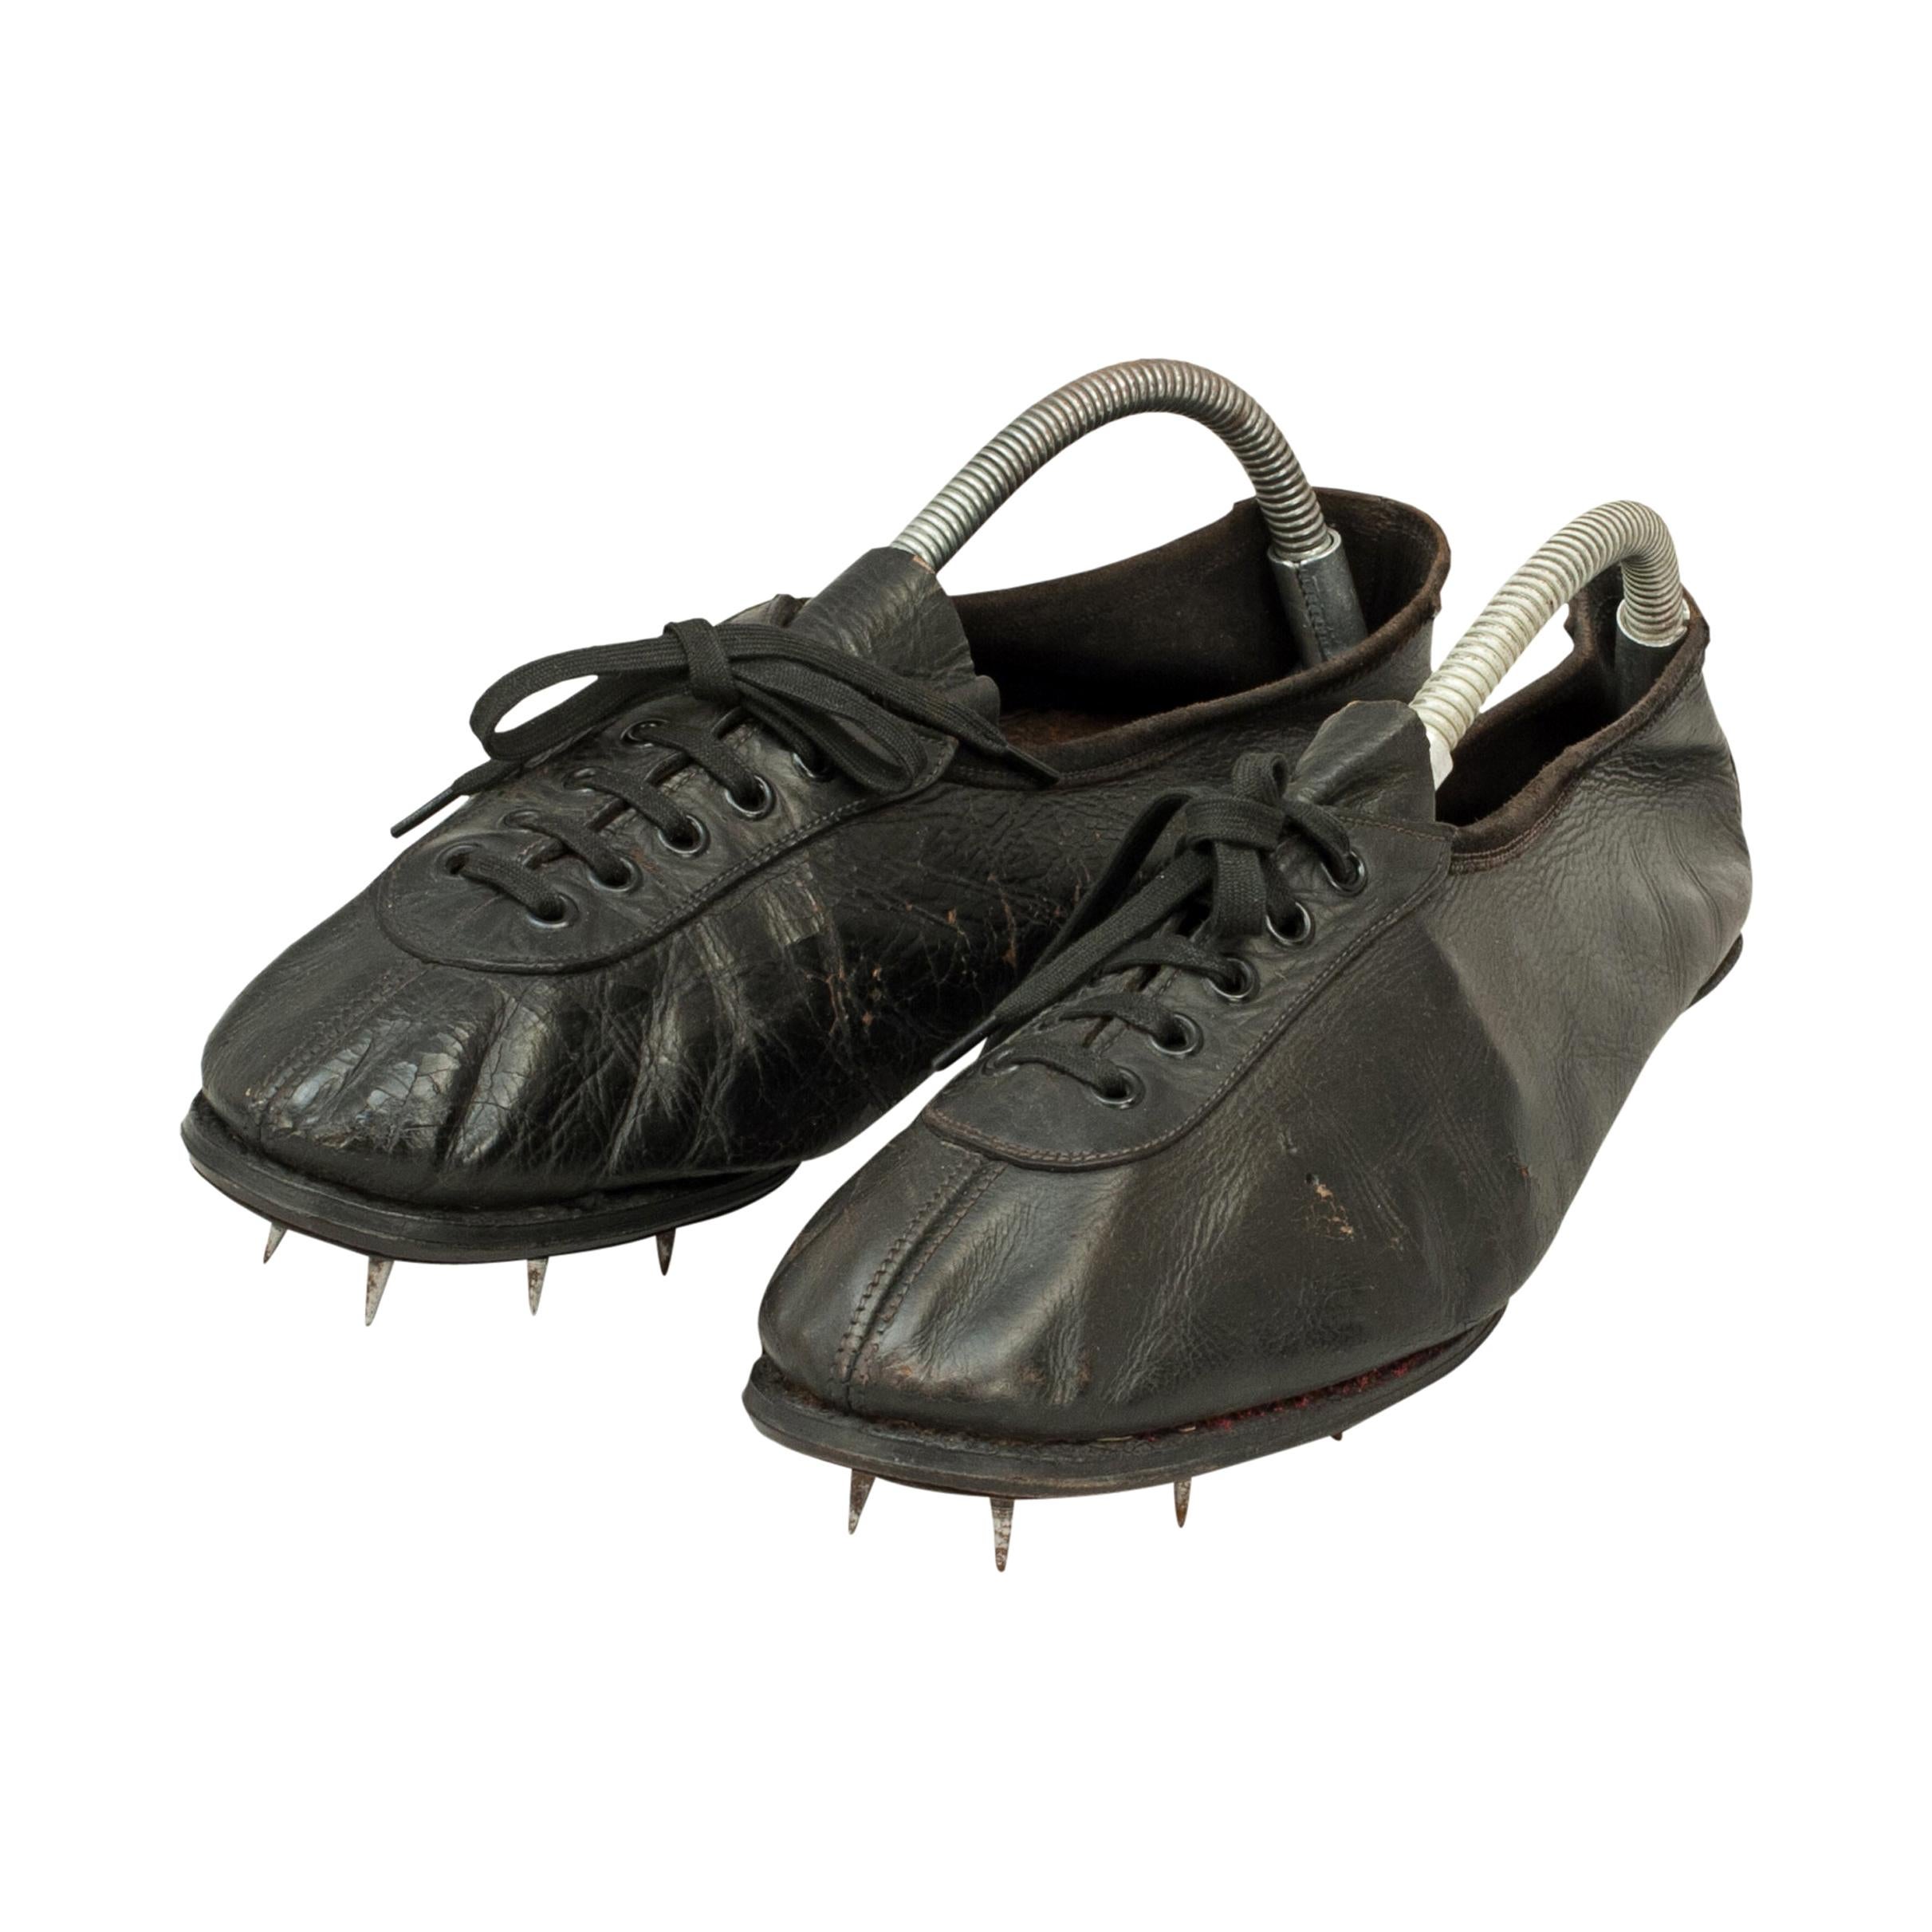 Pair of Vintage Running Spikes, Athletes Sprinting Shoes